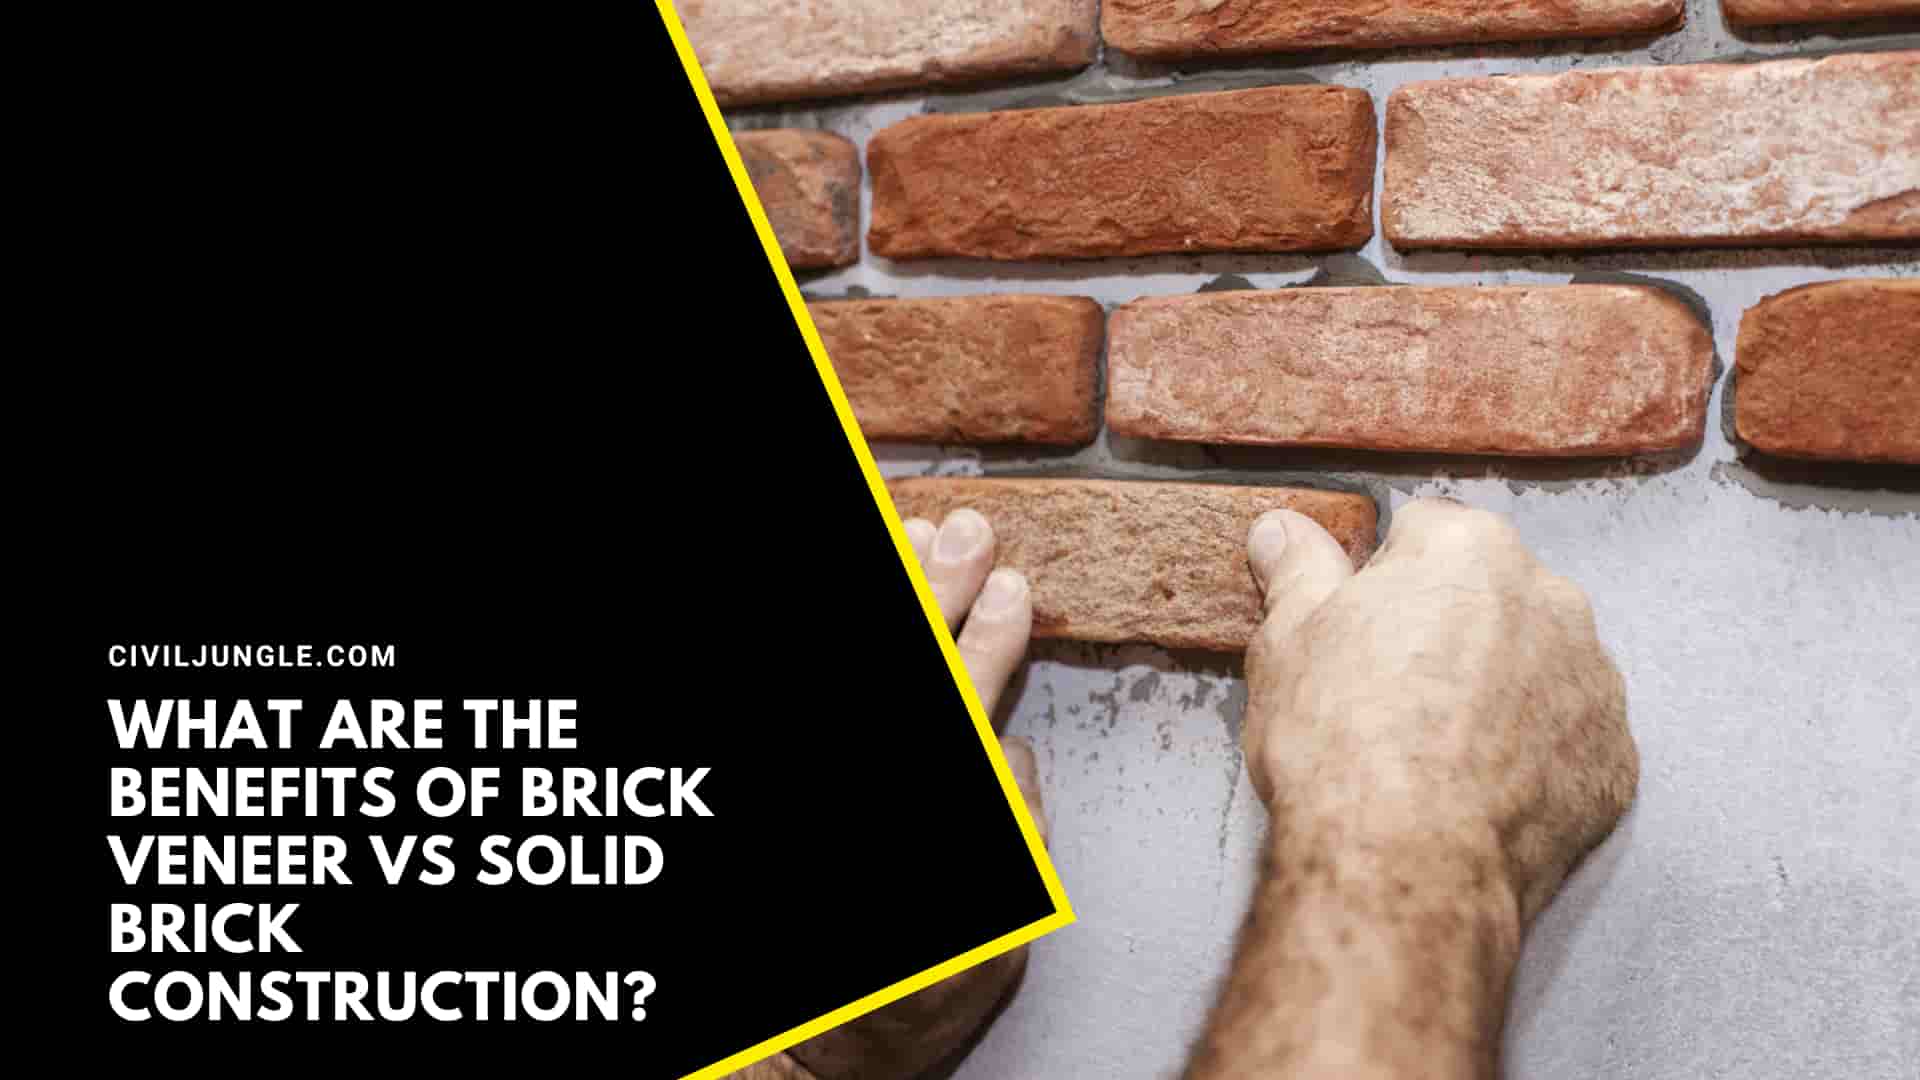 What Are The Benefits Of Brick Veneer Vs Solid Brick Construction?